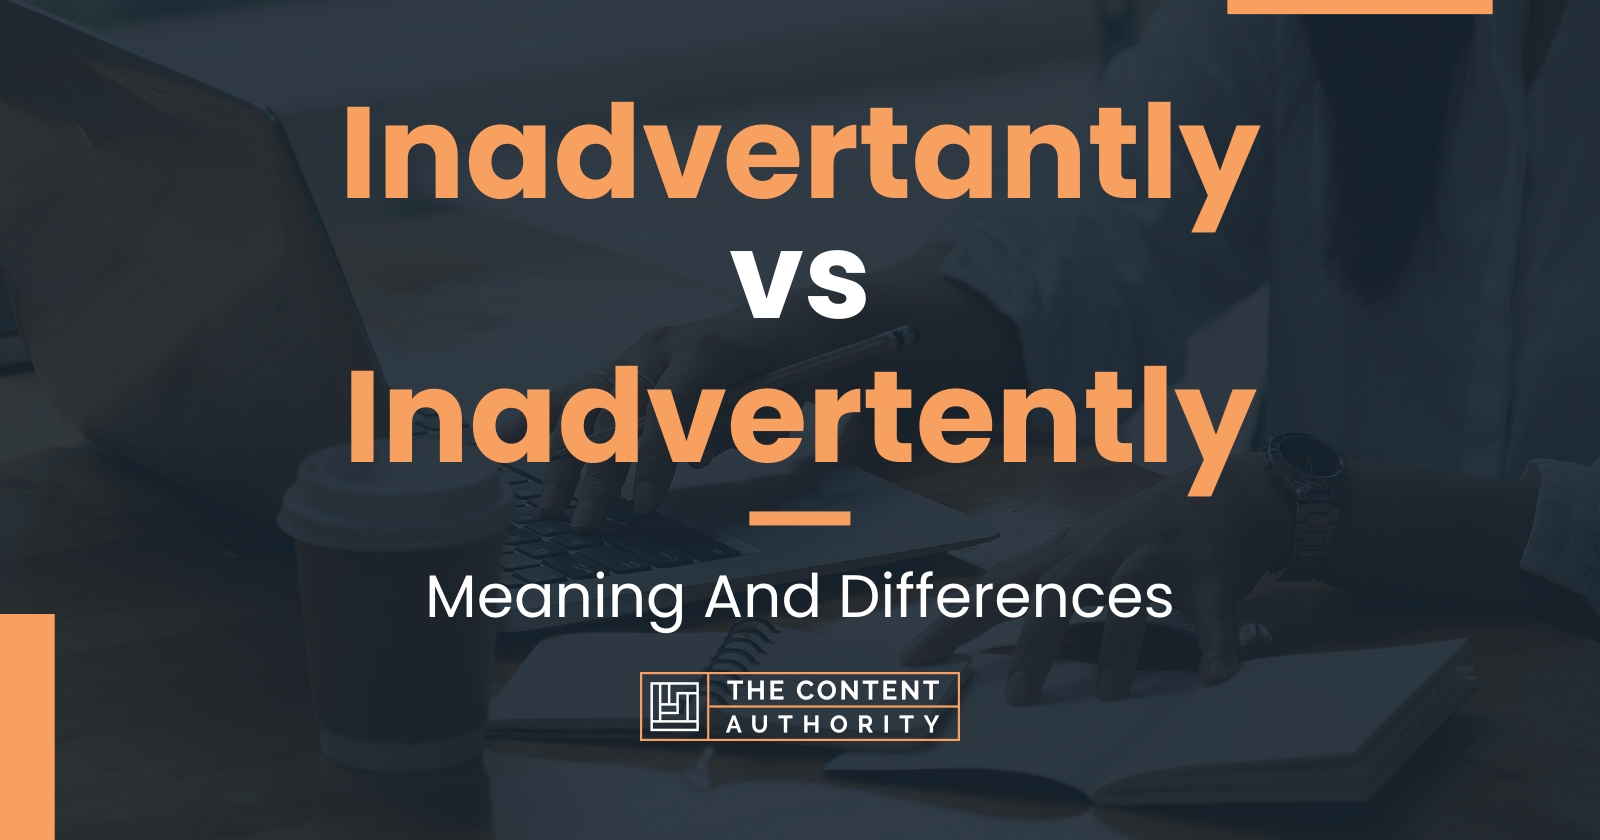 Inadvertantly vs Inadvertently: Meaning And Differences